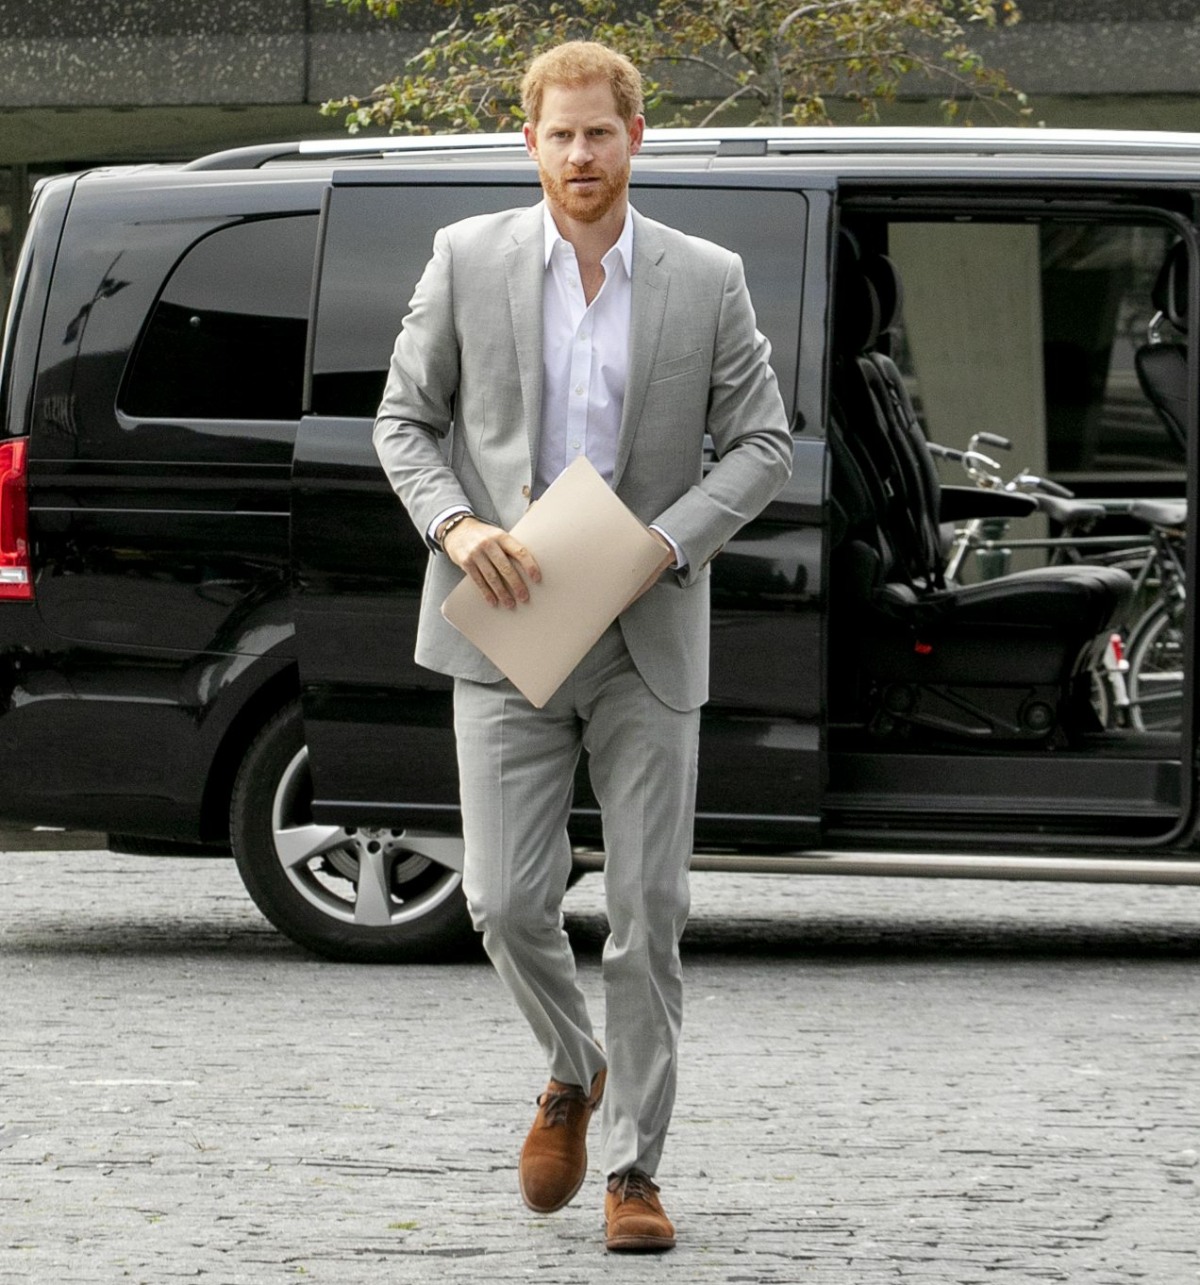 Prince Harry launches new partnership Photo: Albert Nieboer / Netherlands OUT / Point de Vue OUT